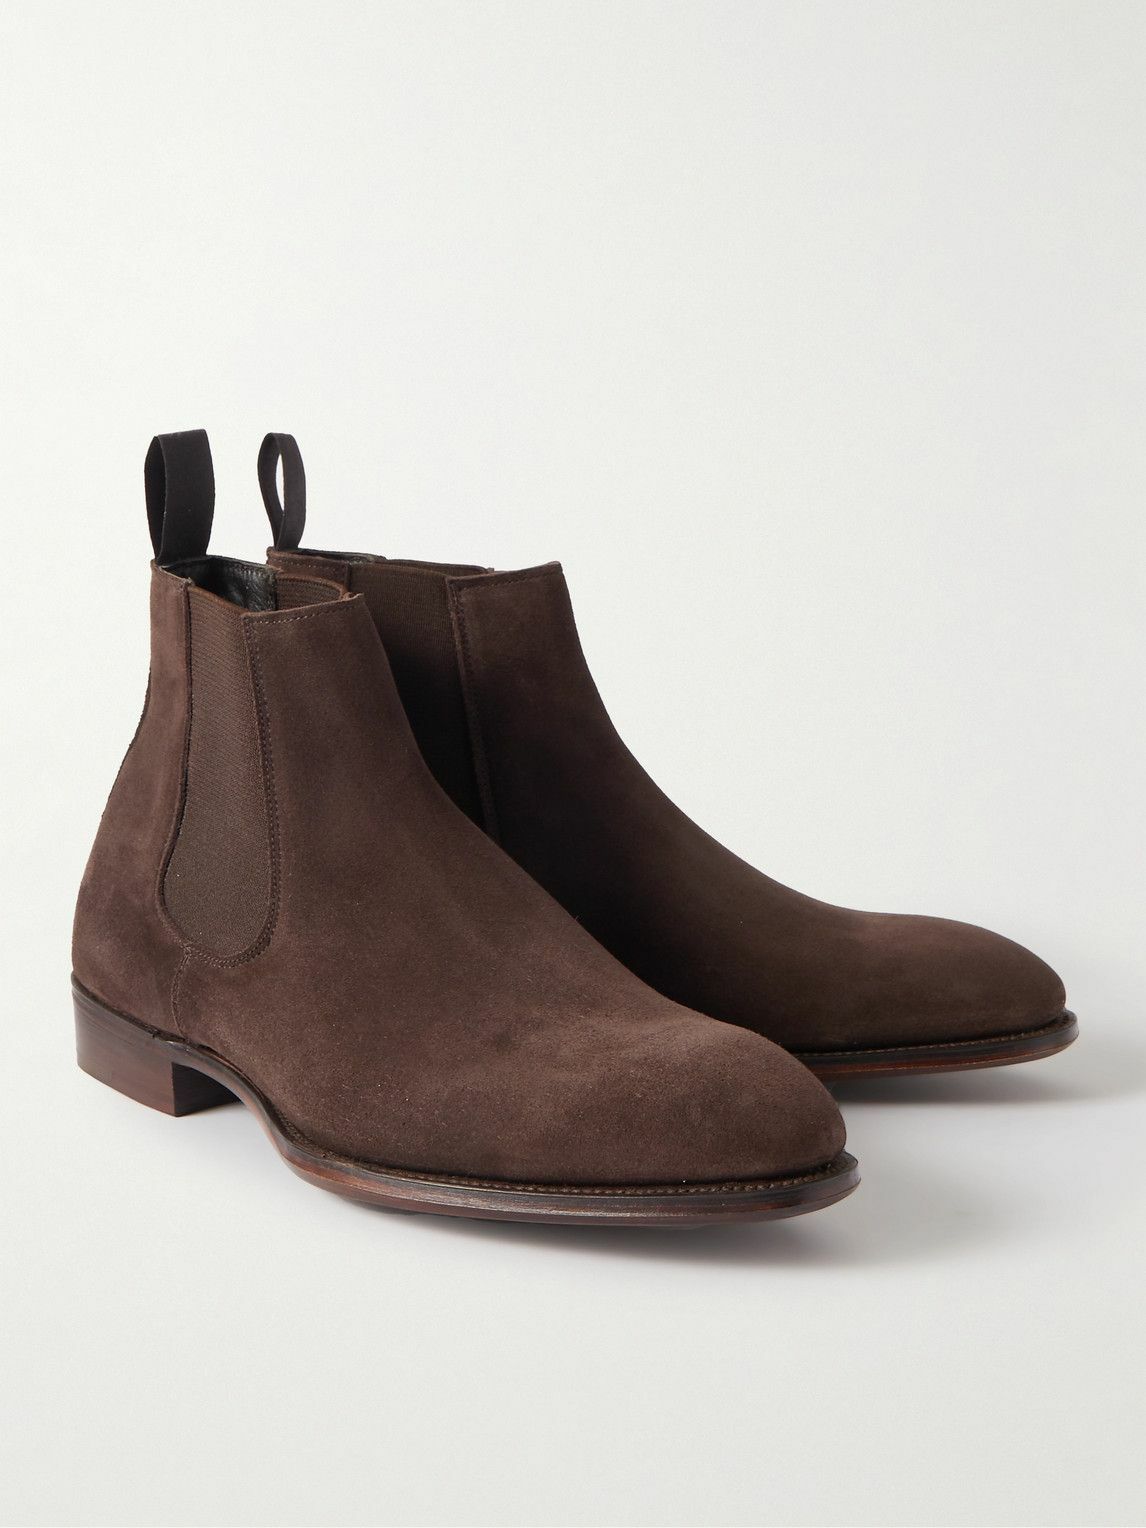 George Cleverley - Jason Suede Chelsea Boots - Brown George Cleverley